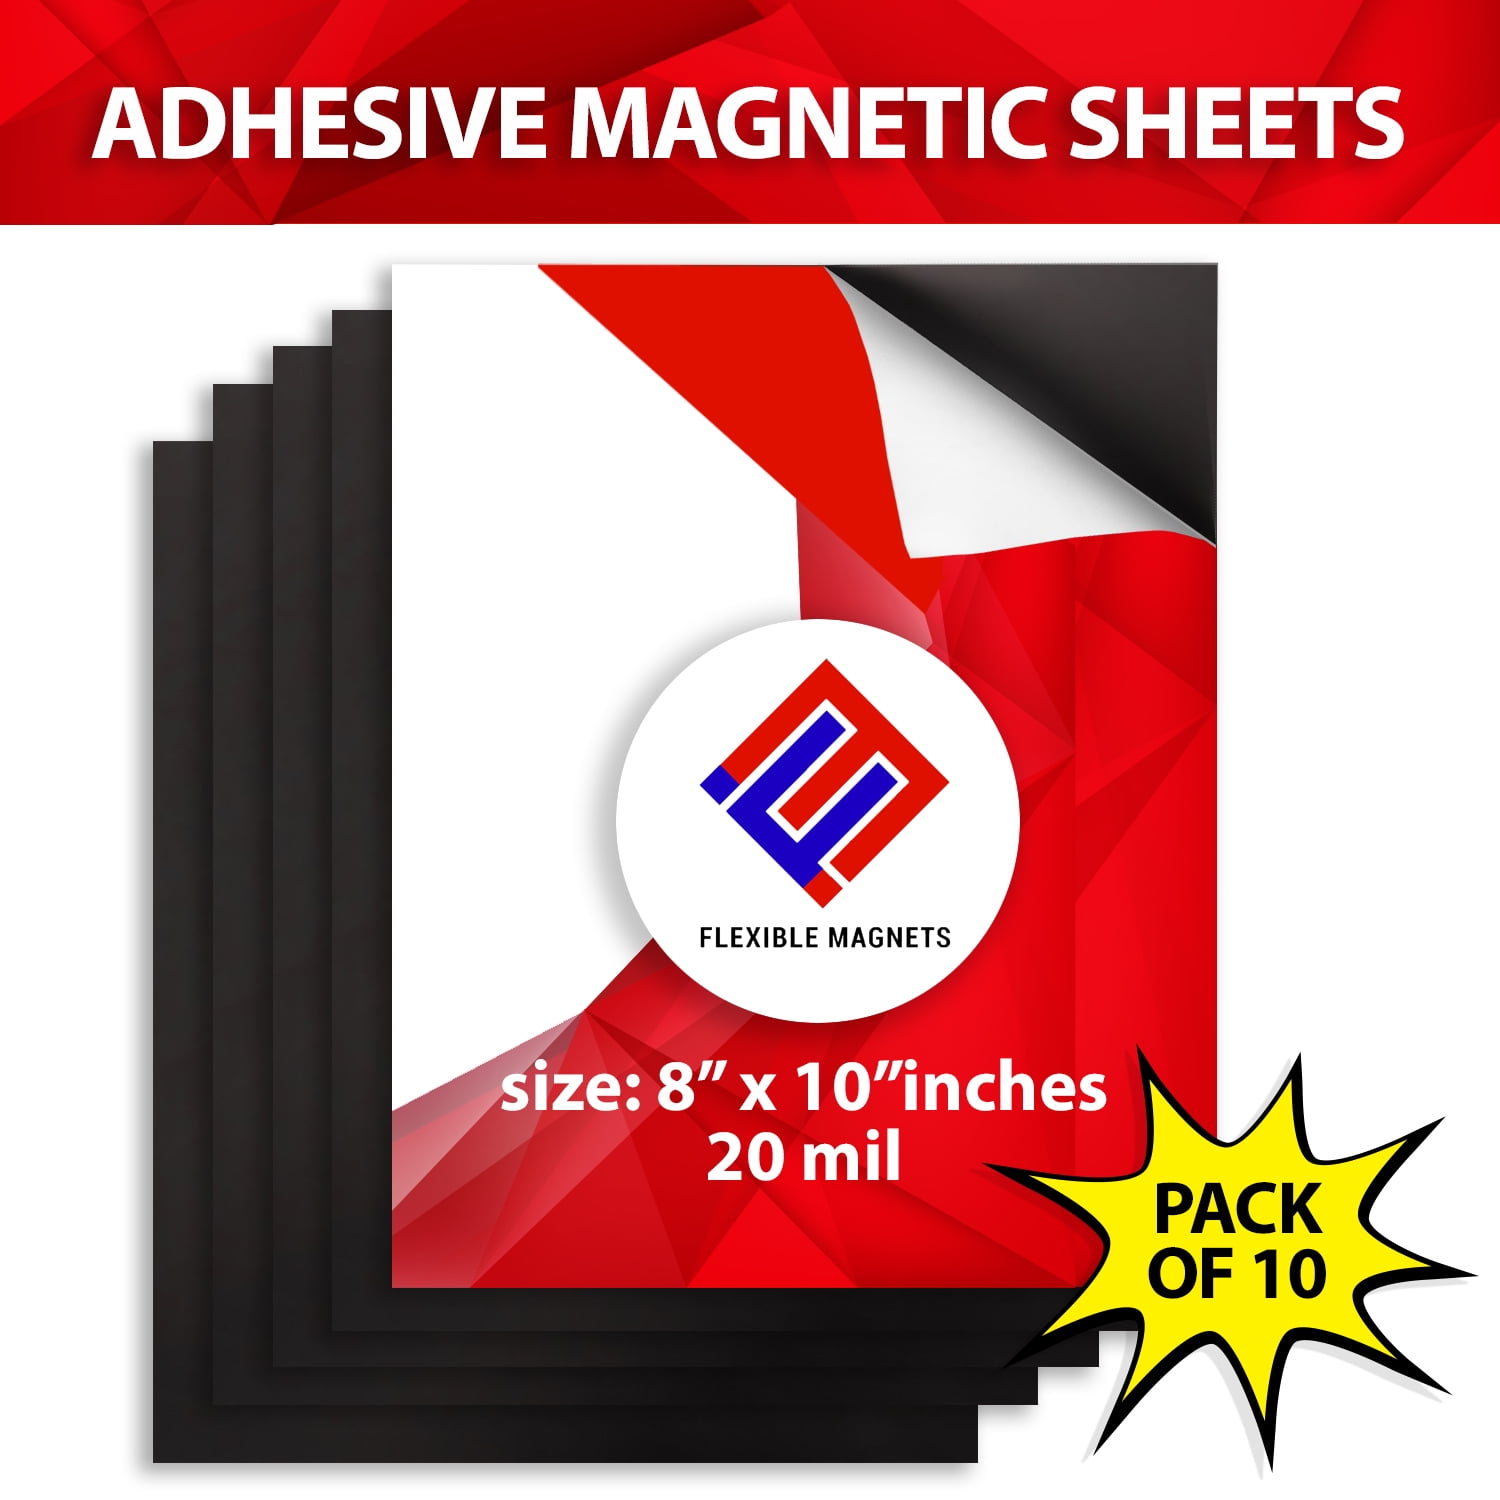 Marietta Magnetics - 25 Magnetic Sheets of 5 X 7 Adhesive 30 Mil for sale  online